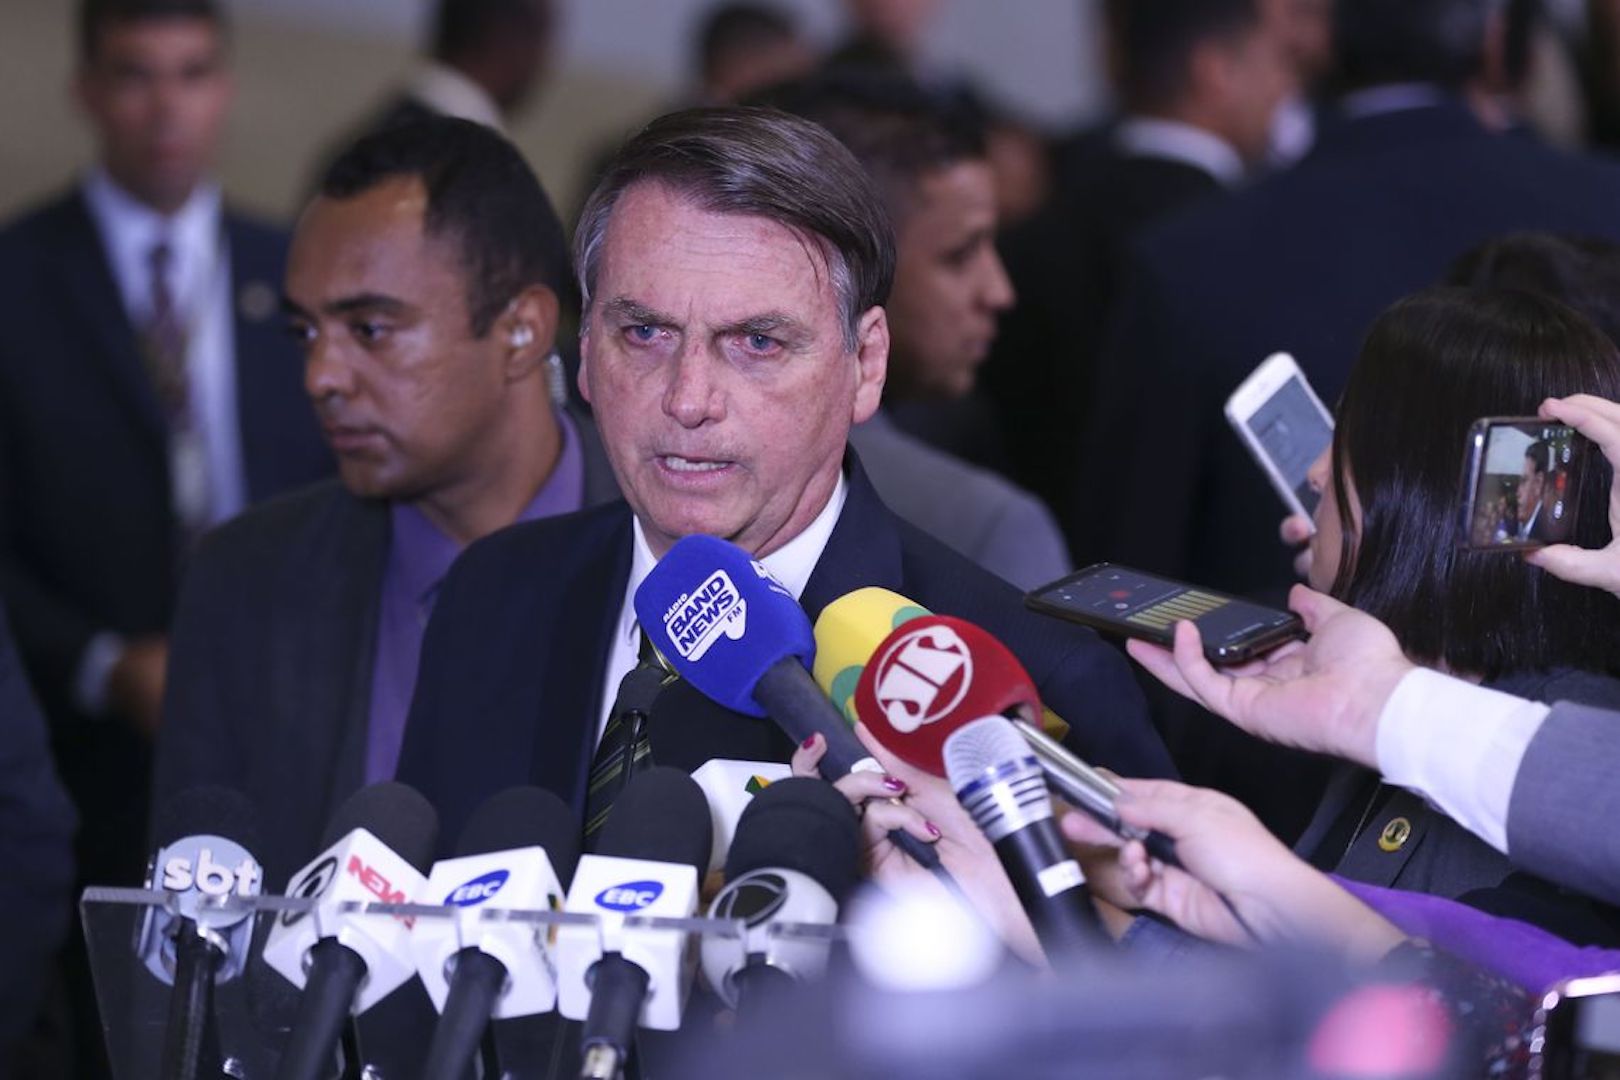 Brazil,President Jair Bolsonaro talks to reporters about controversy involving deaths and disappearances during military dictatorship.